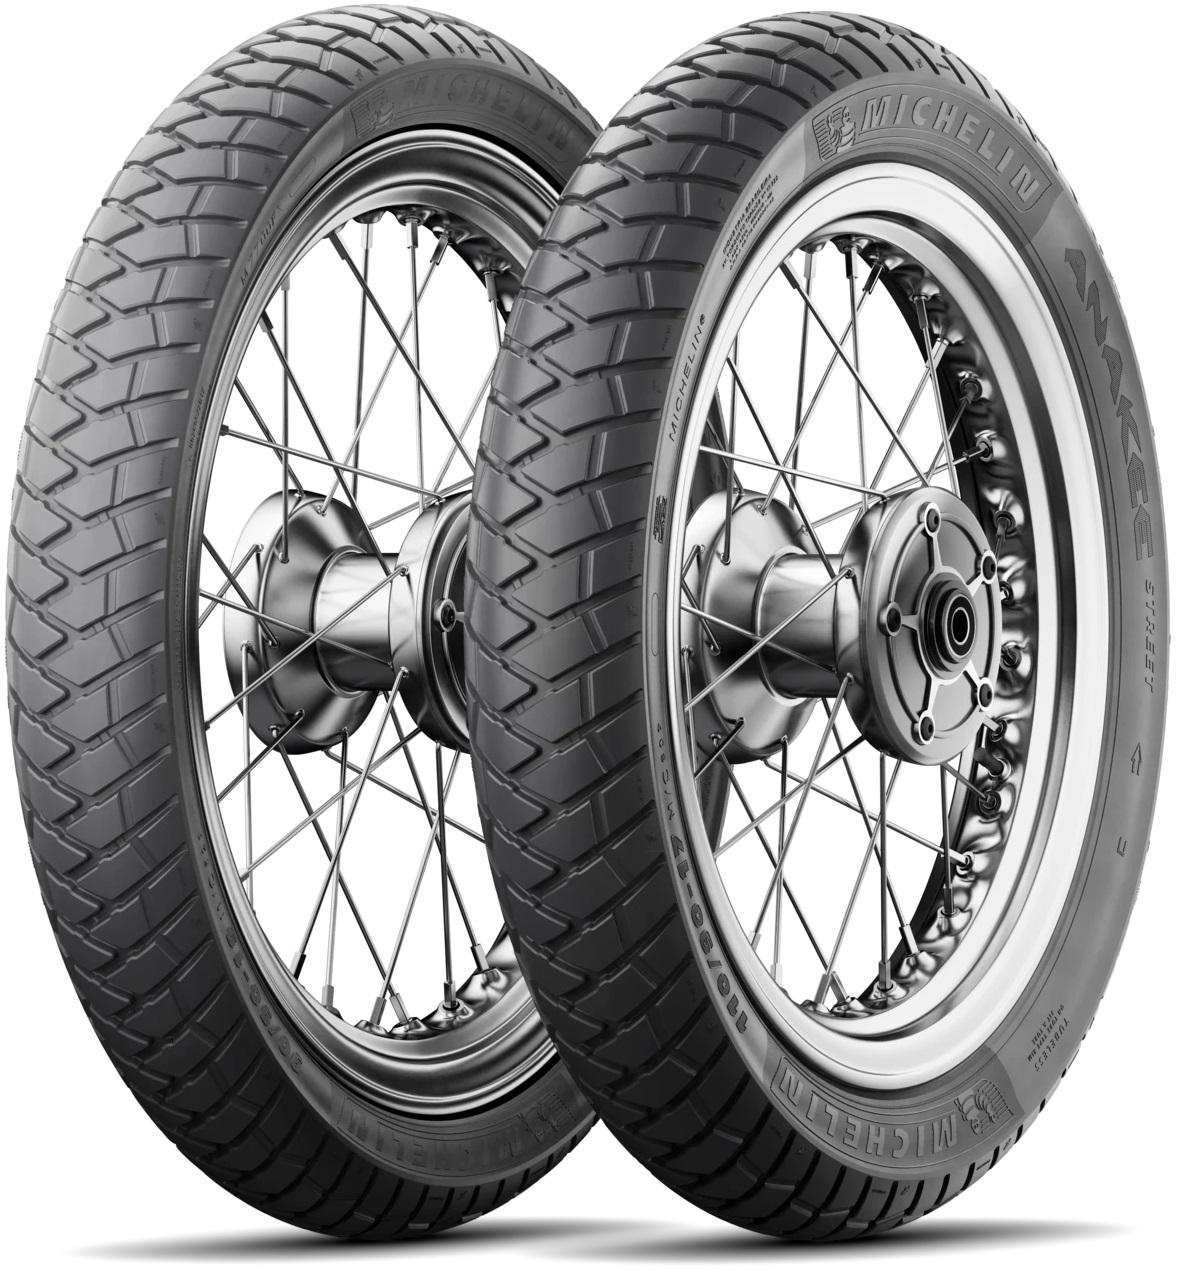 Michelin Anakee Street Tyres